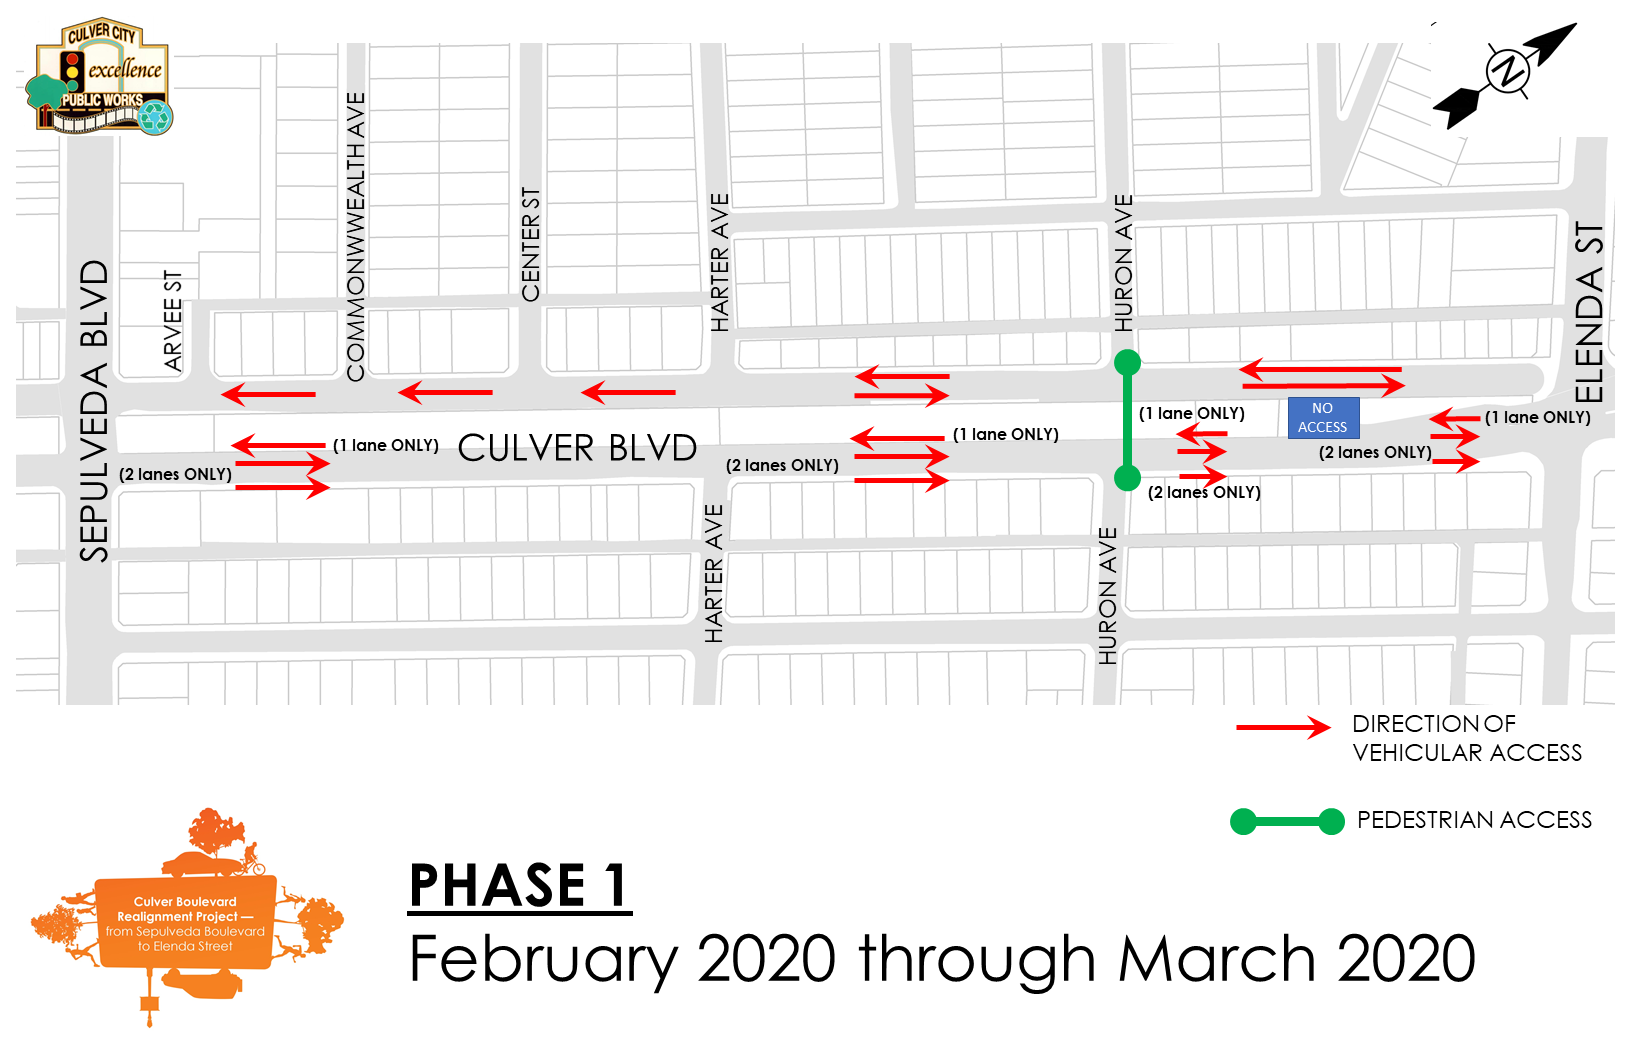 Phase 1, February 2020 through March 2020 traffic map